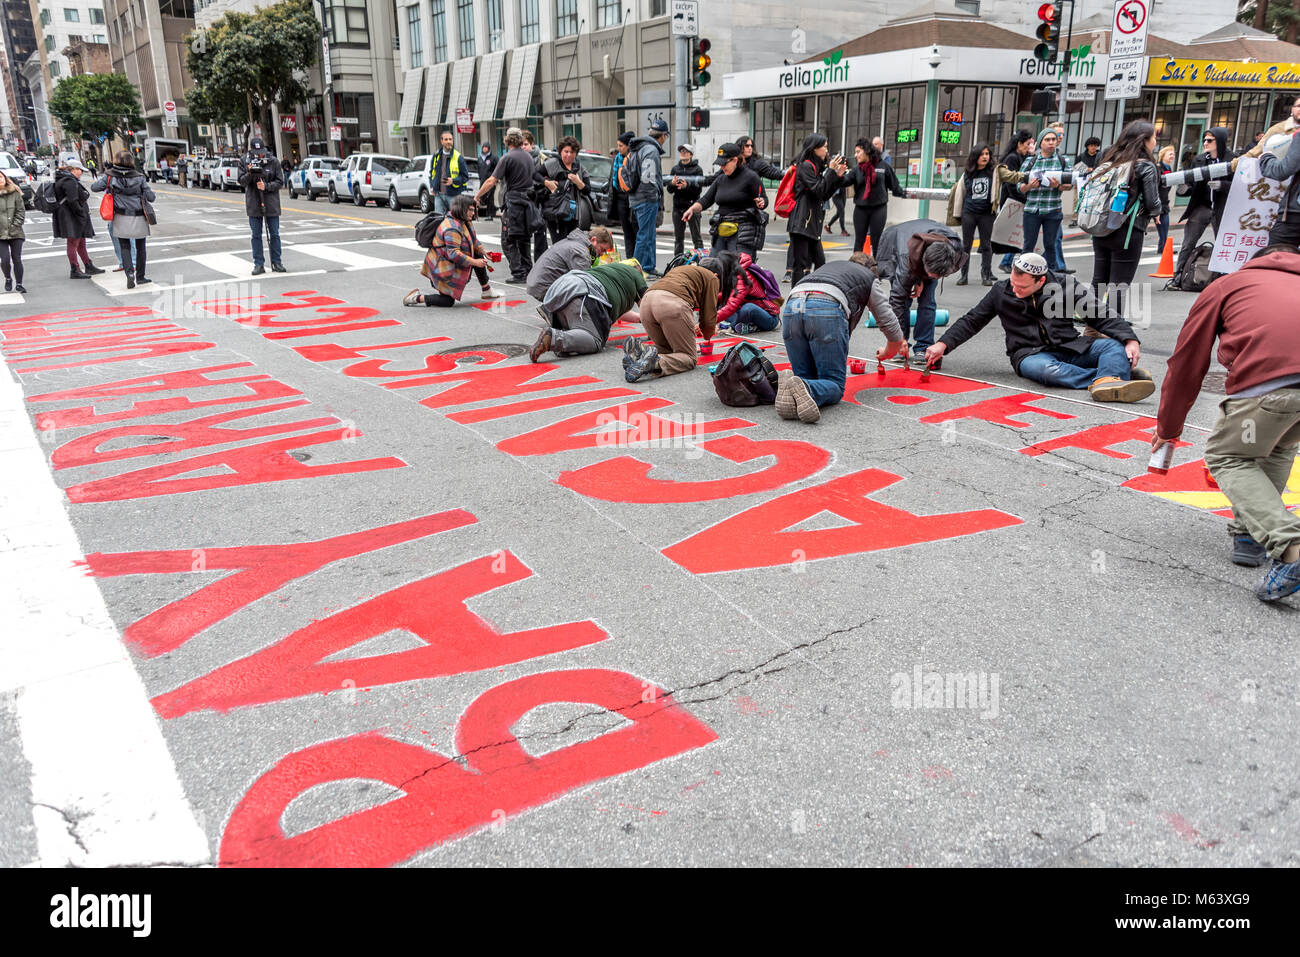 San Francisco, USA. 28th February, 2018. An estimated three hundred protesters gather outside San Francisco Immigration and Customs Enforcement building (ICE) to protest recent arrests of at least 150 people in ICE operations conducted over the previous few days in Northern California. San Francisco remains a sanctuary city. Shelly Rivoli/Alamy Live News Stock Photo